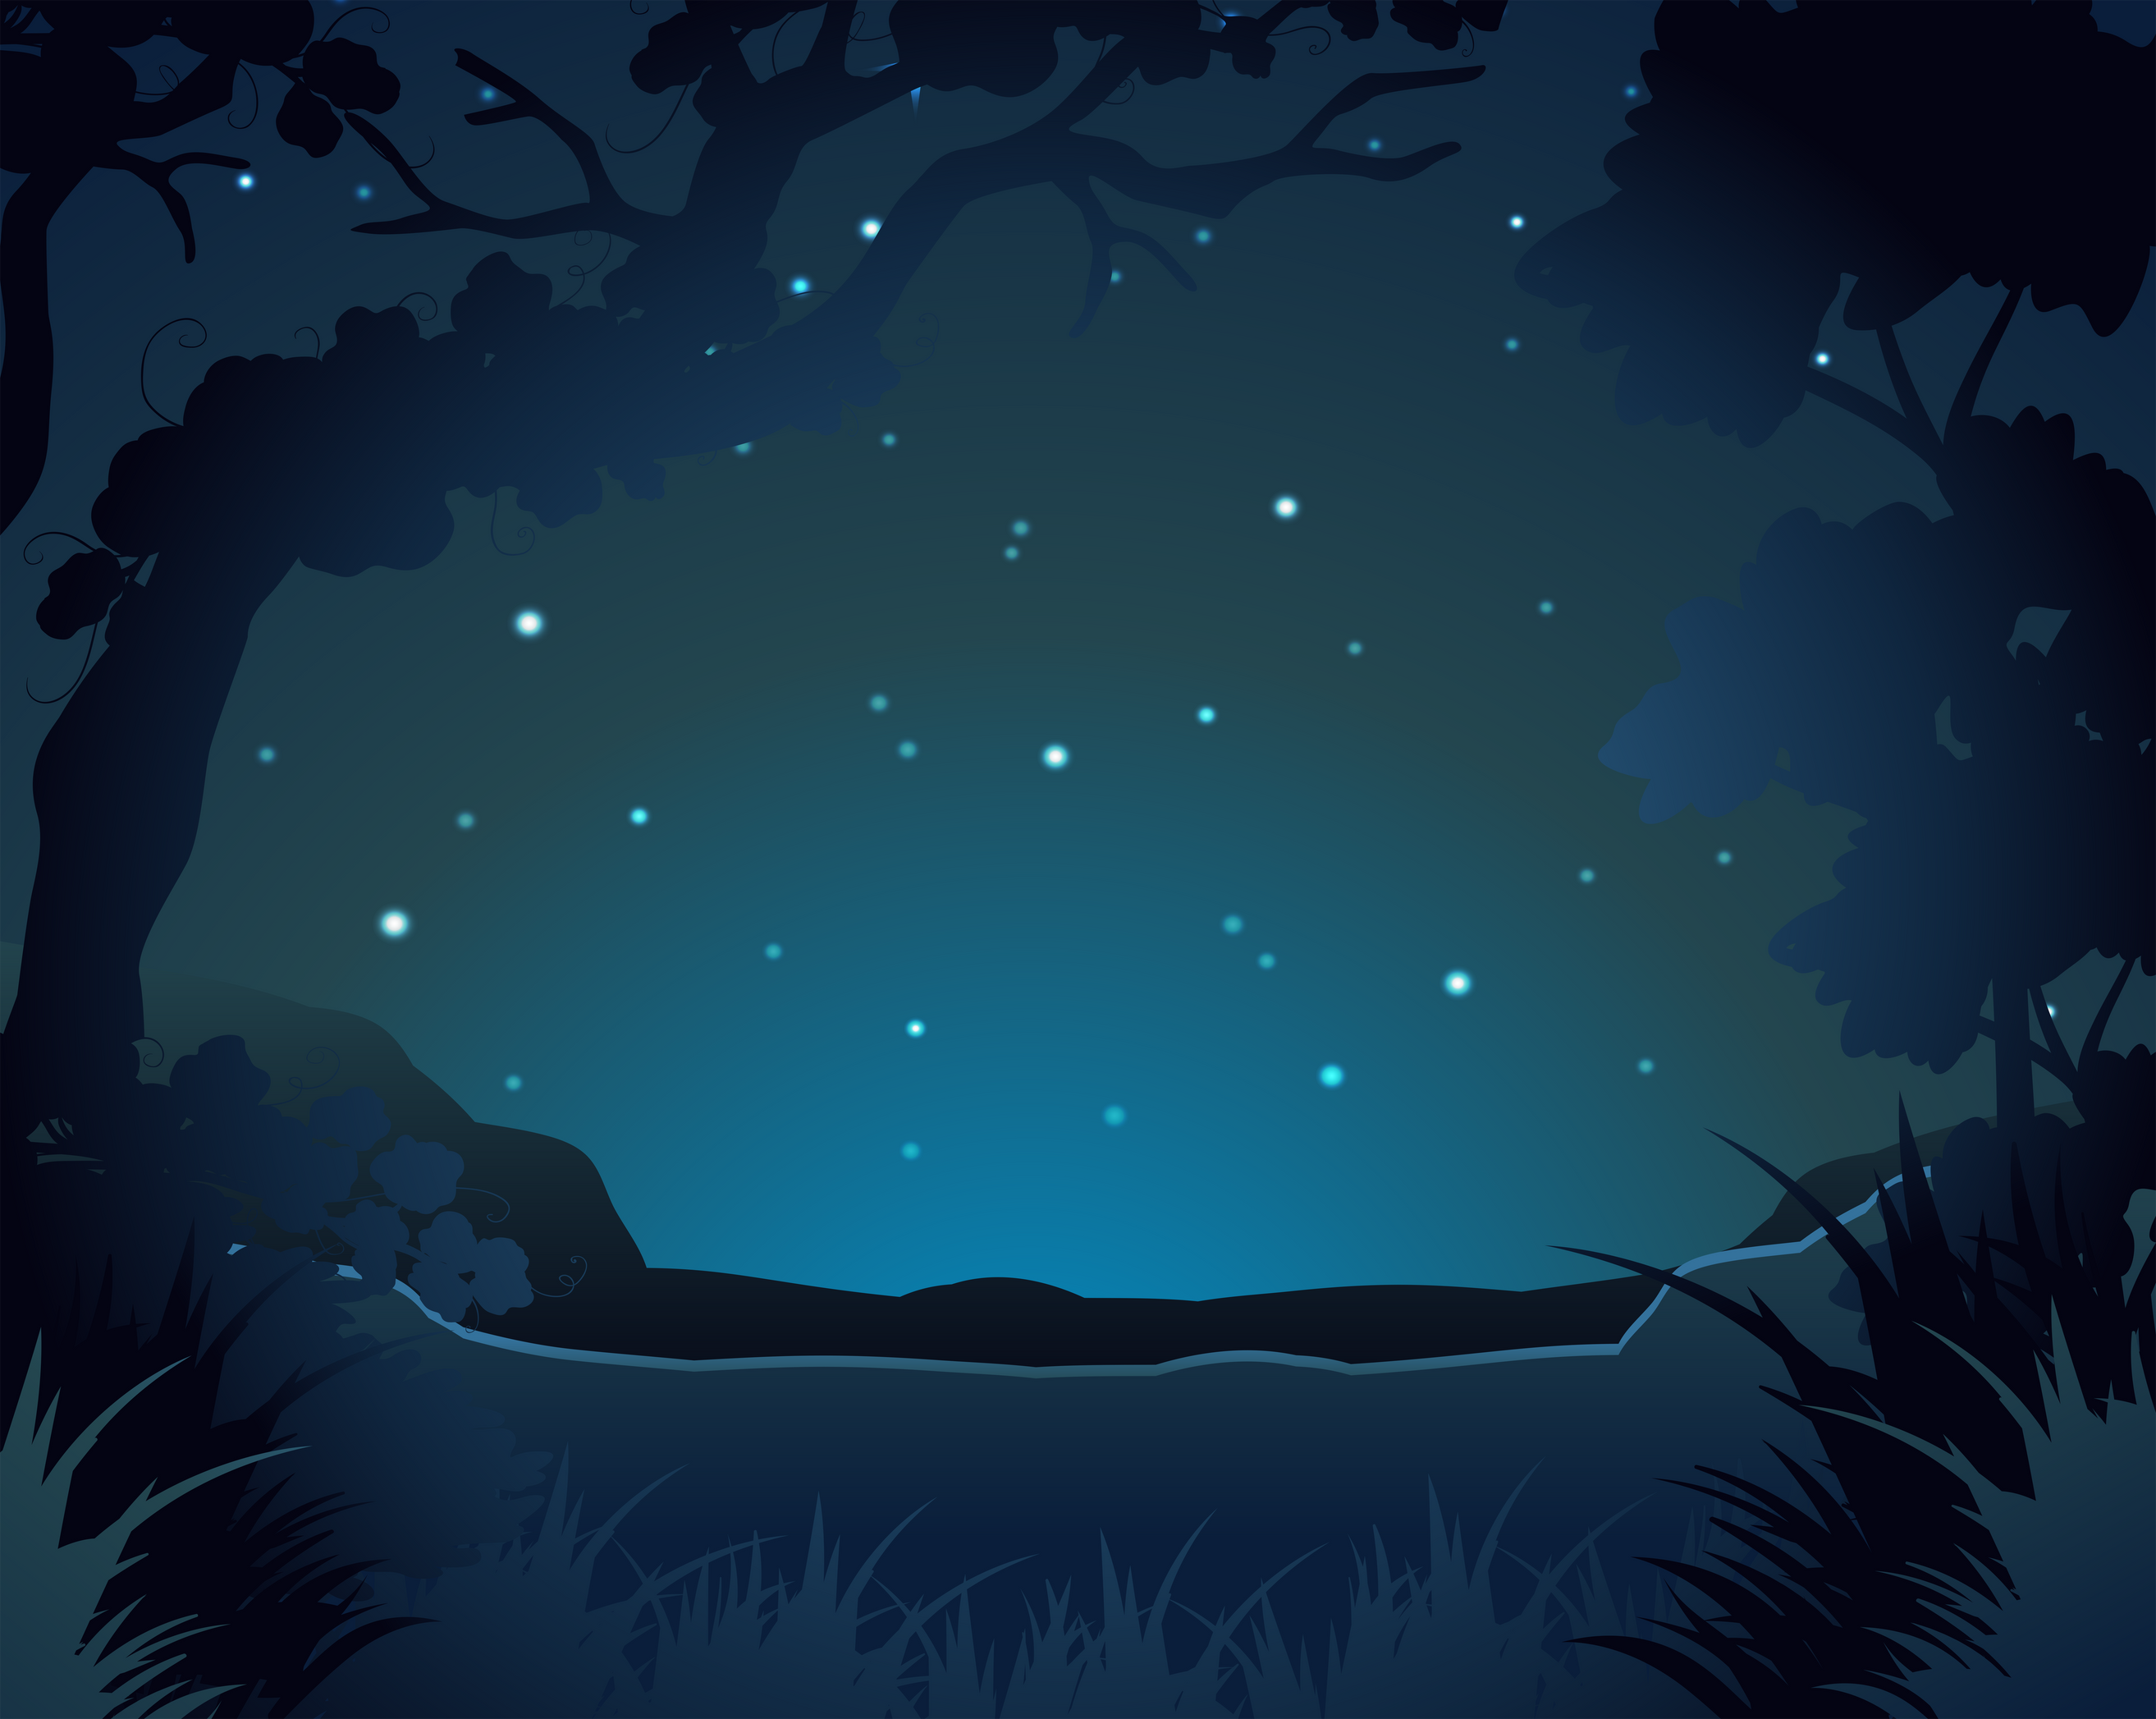 Forest scene at night